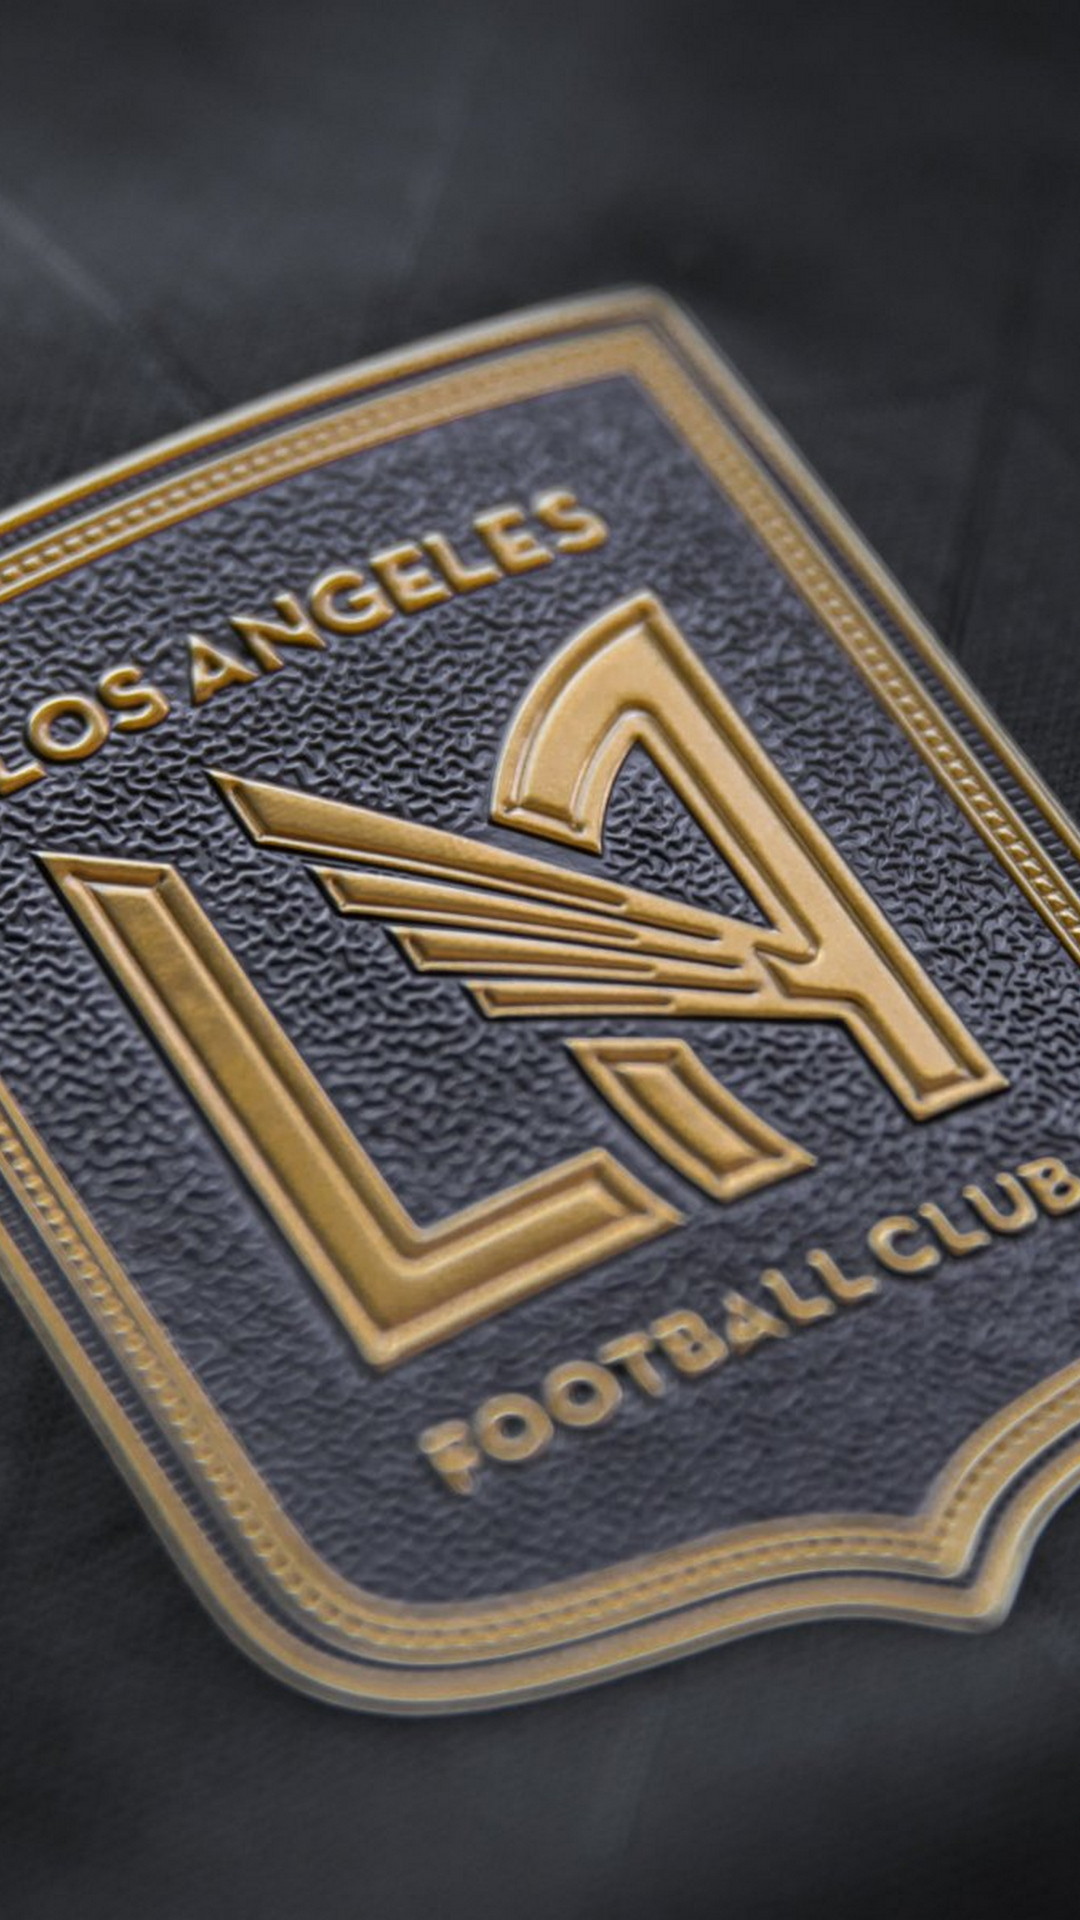 Los Angeles FC HD Wallpapers For Mobile With high-resolution 1080X1920 pixel. You can use this wallpaper for your Desktop Computers, Mac Screensavers, Windows Backgrounds, iPhone Wallpapers, Tablet or Android Lock screen and another Mobile device